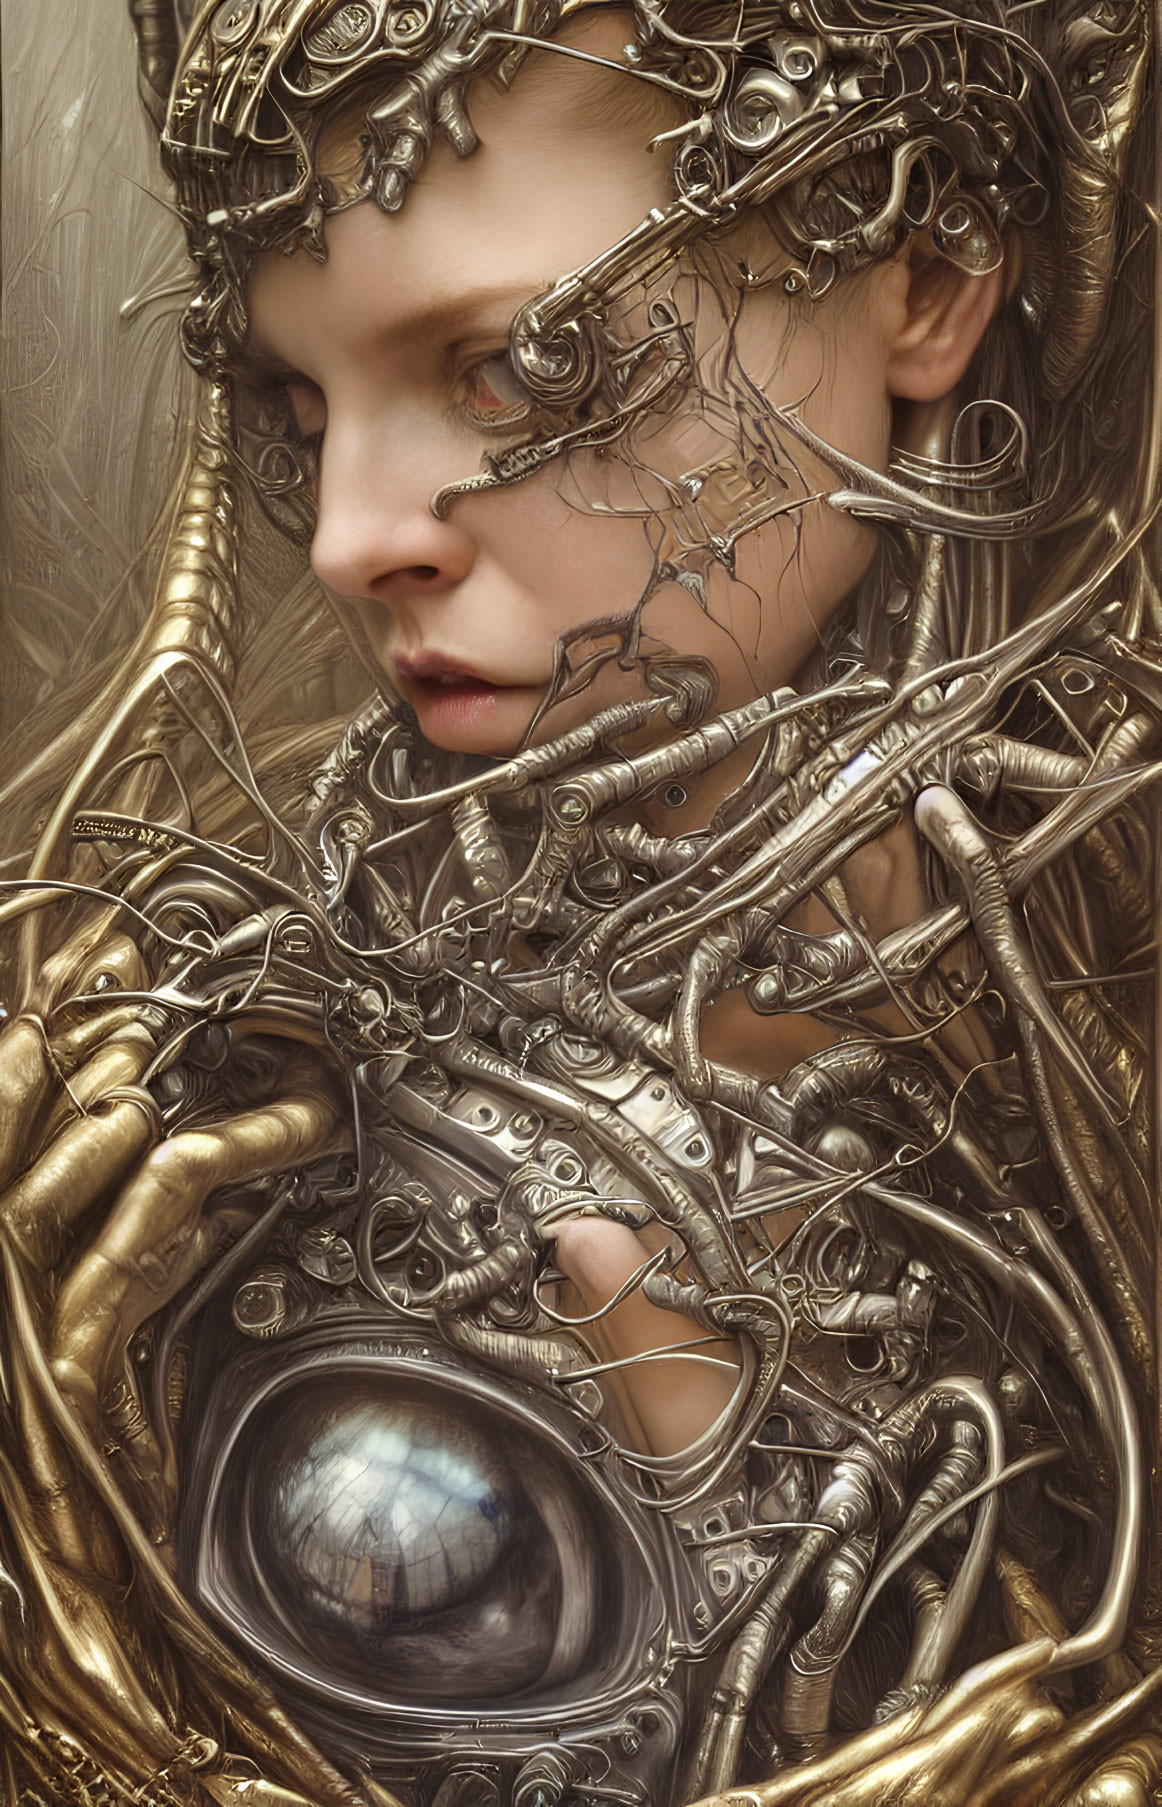 Fantasy portrait with metallic gear and wire adornments.